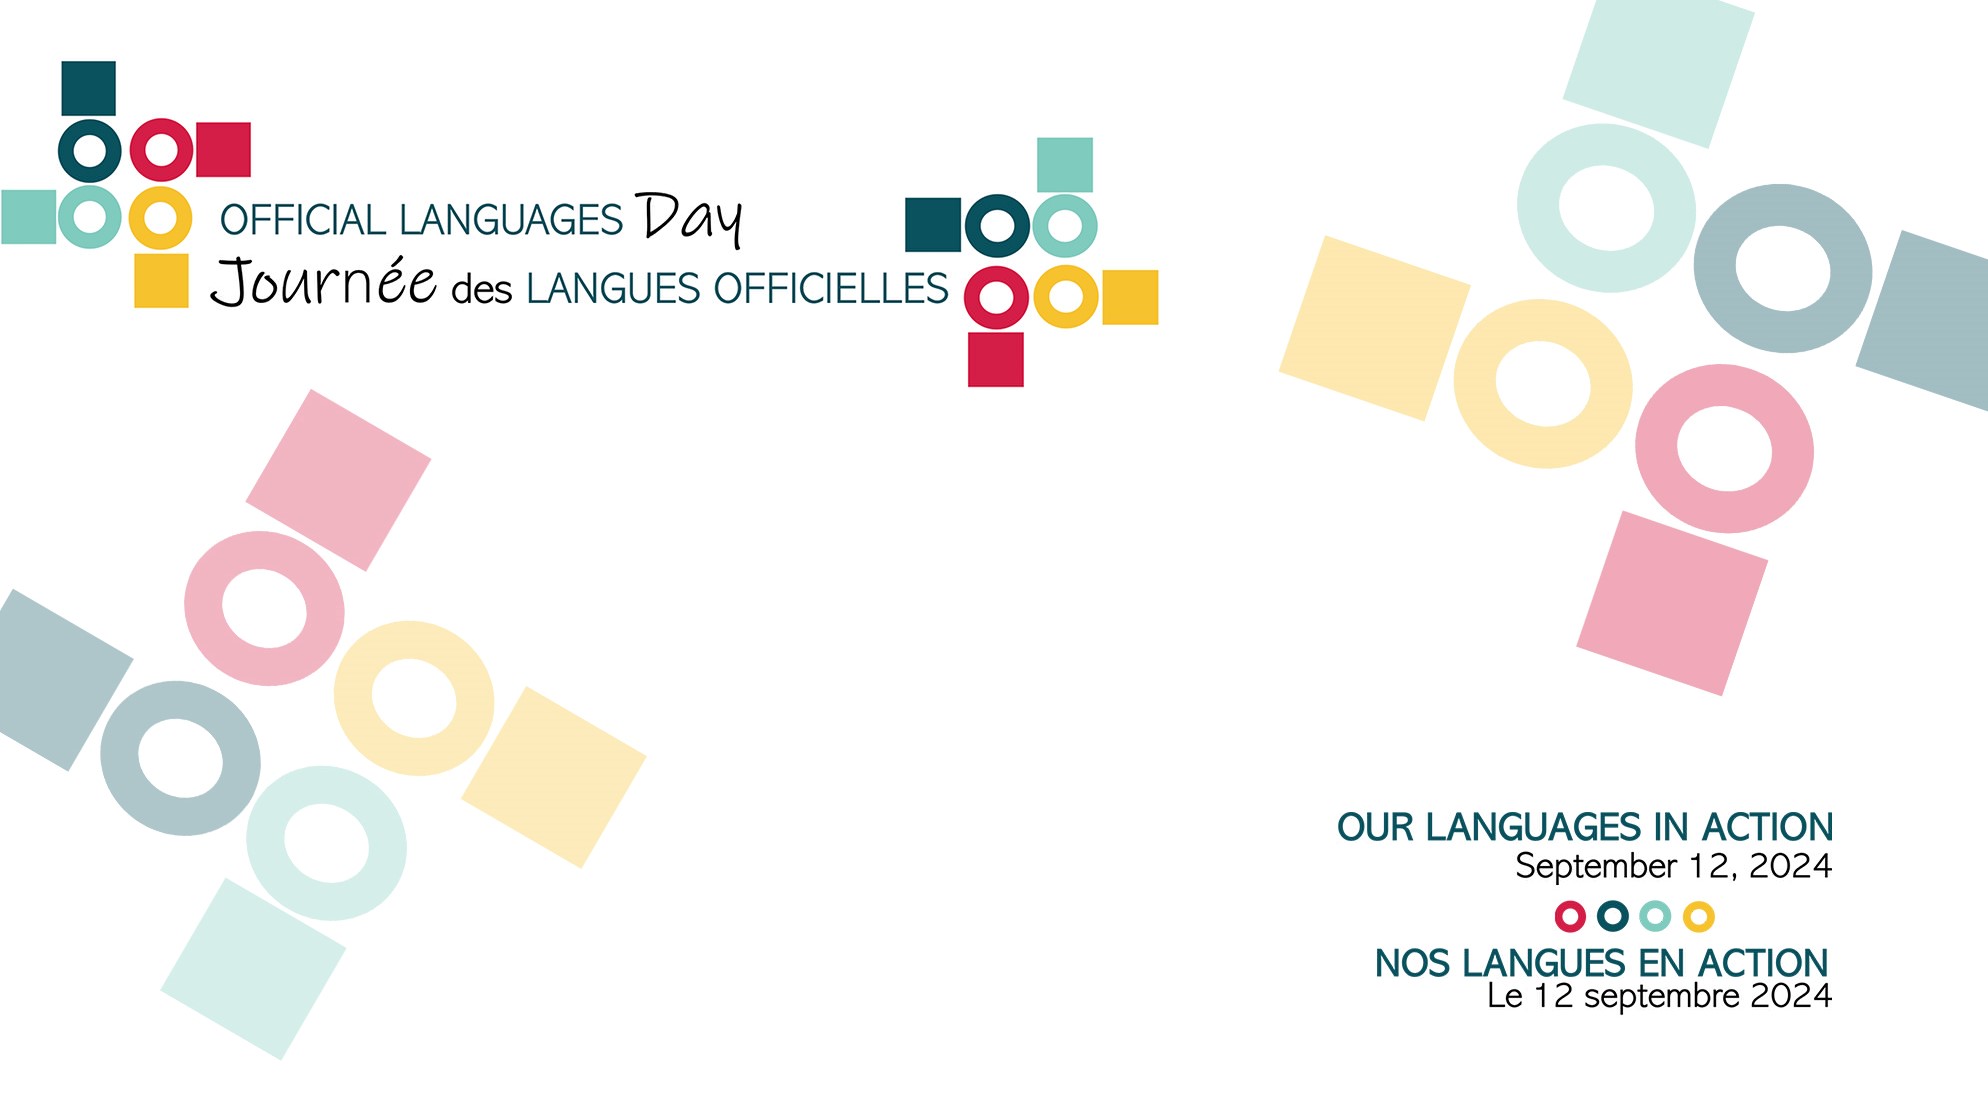 Background with the visual of Official Languages Day with colourful speech bubbles and the hashtags #OLDay #JournéeLO